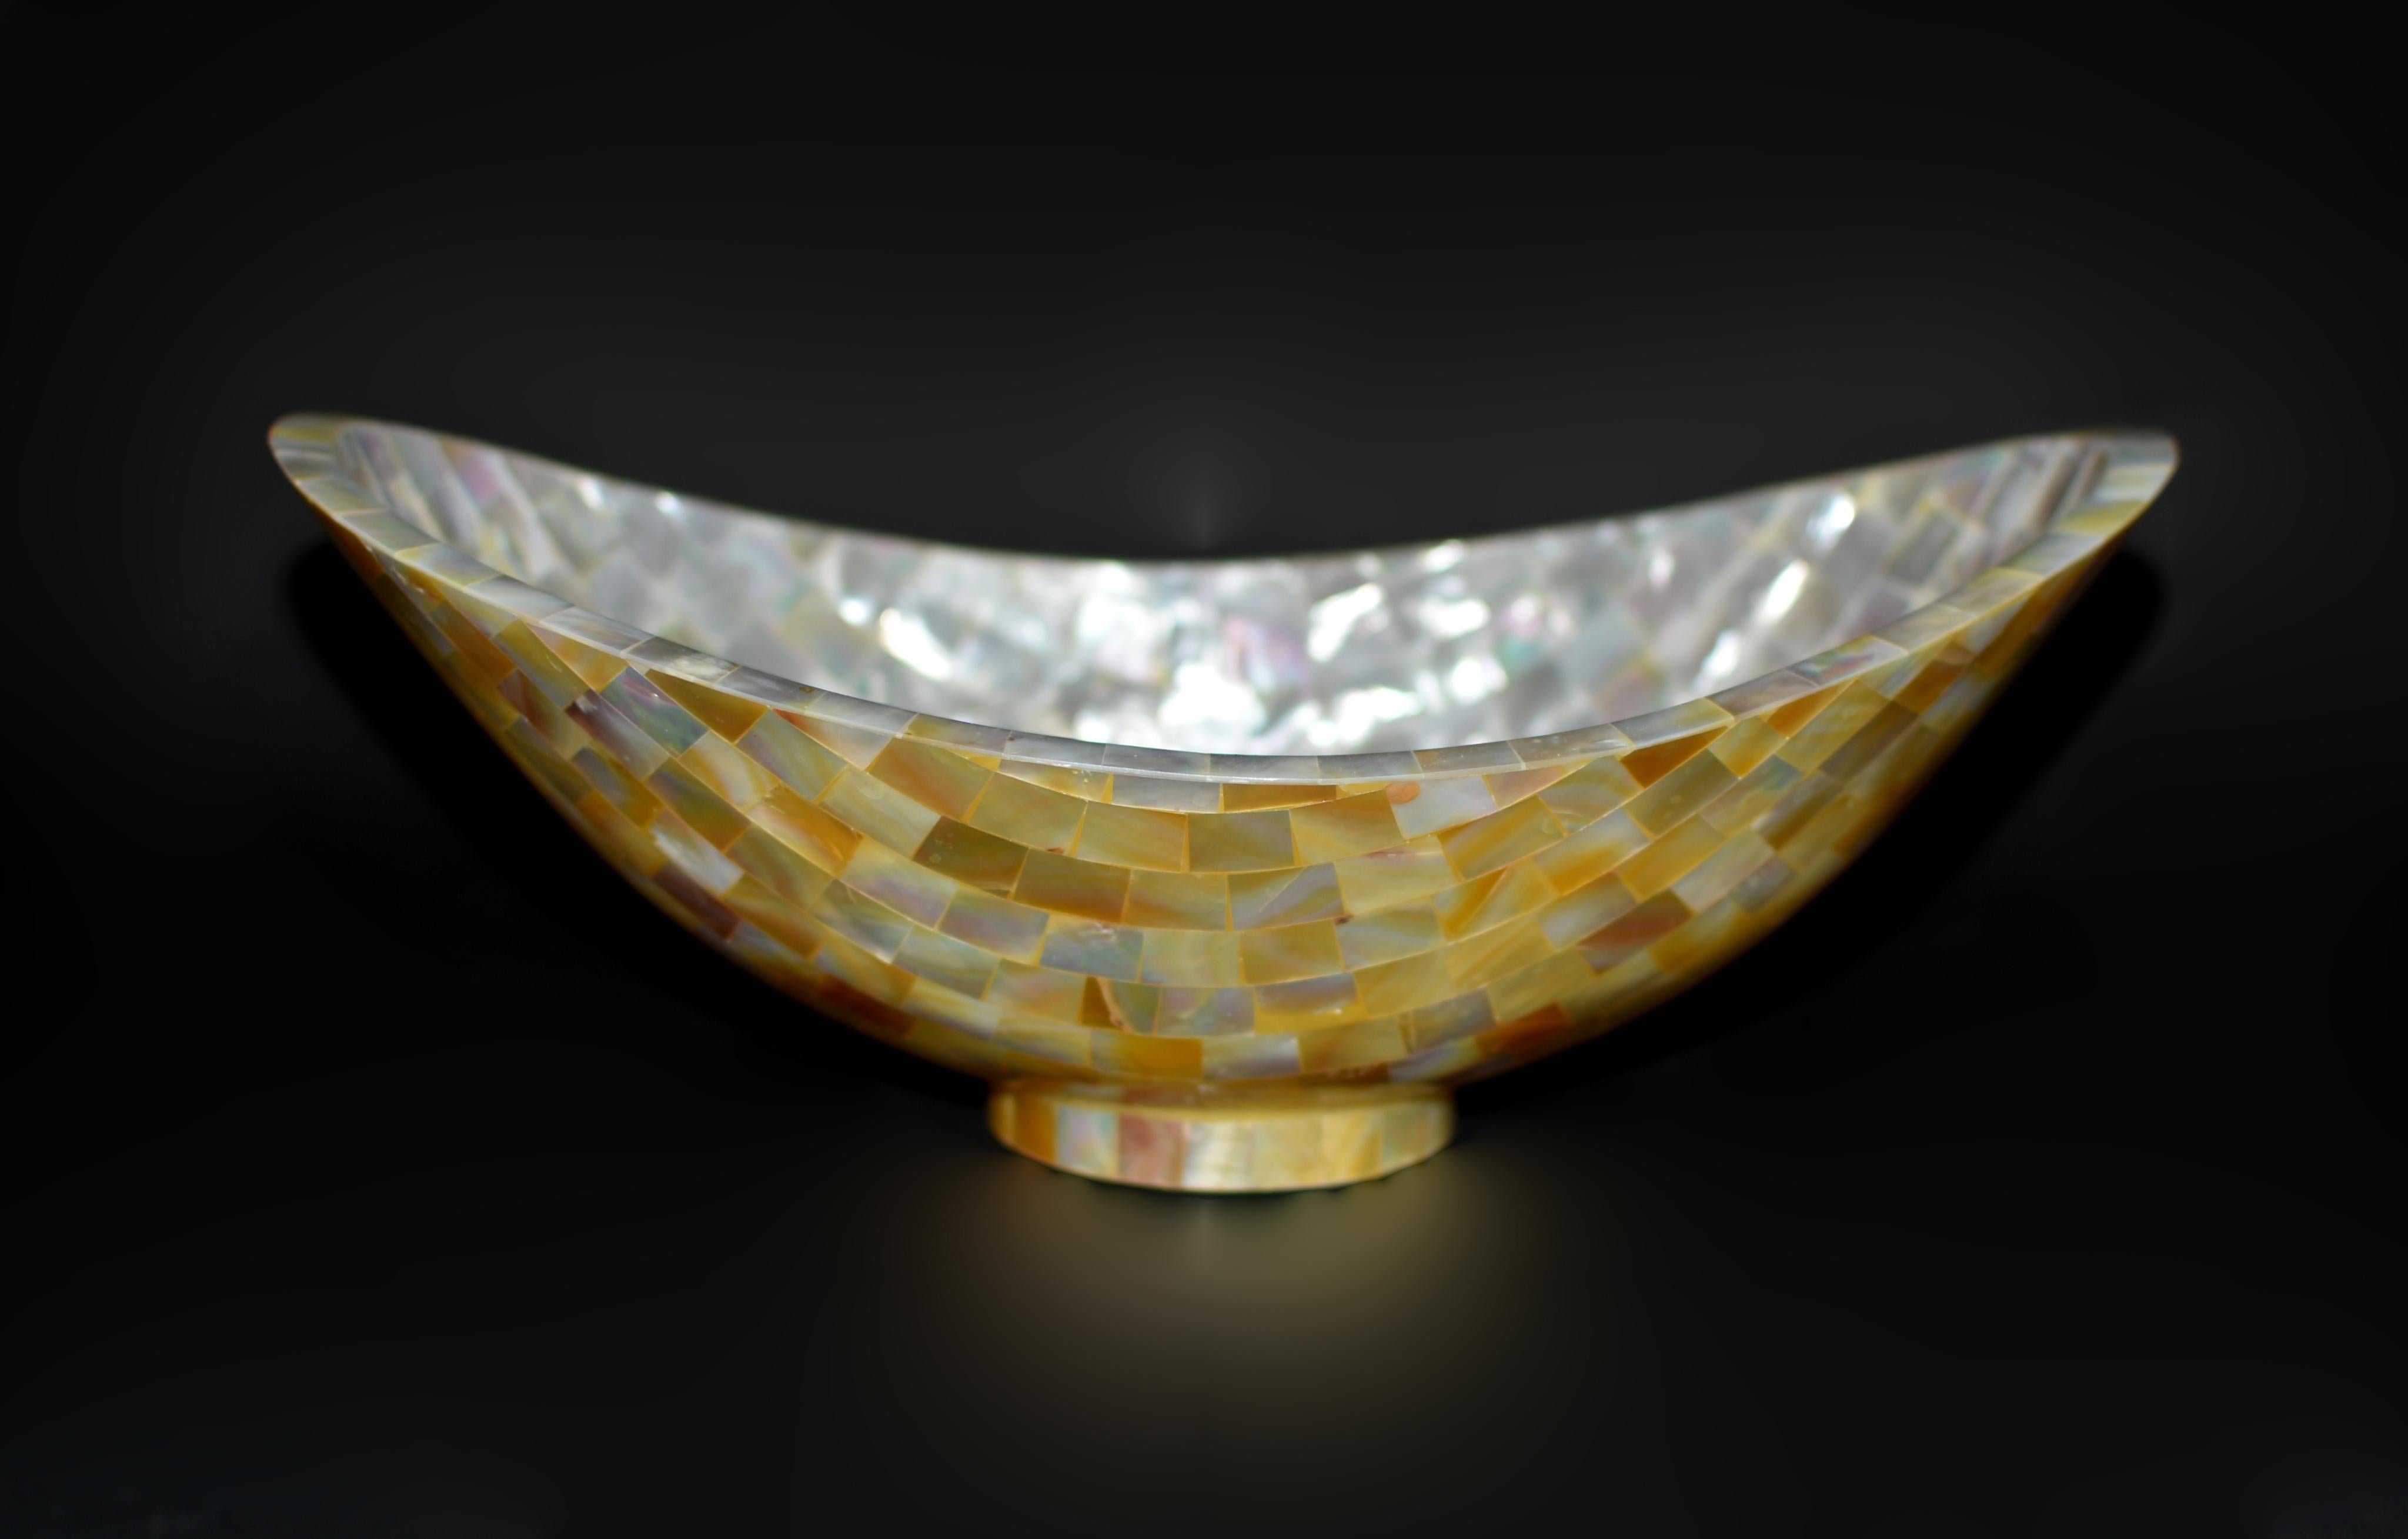 Embodying luxury, artistry and utility, this exquisite mother of pearl bowl is made with meticulous care to detail. Handmade with precision and masterful skill, each mosaic piece carefully selected from a beautiful natural shell, cut and fitted